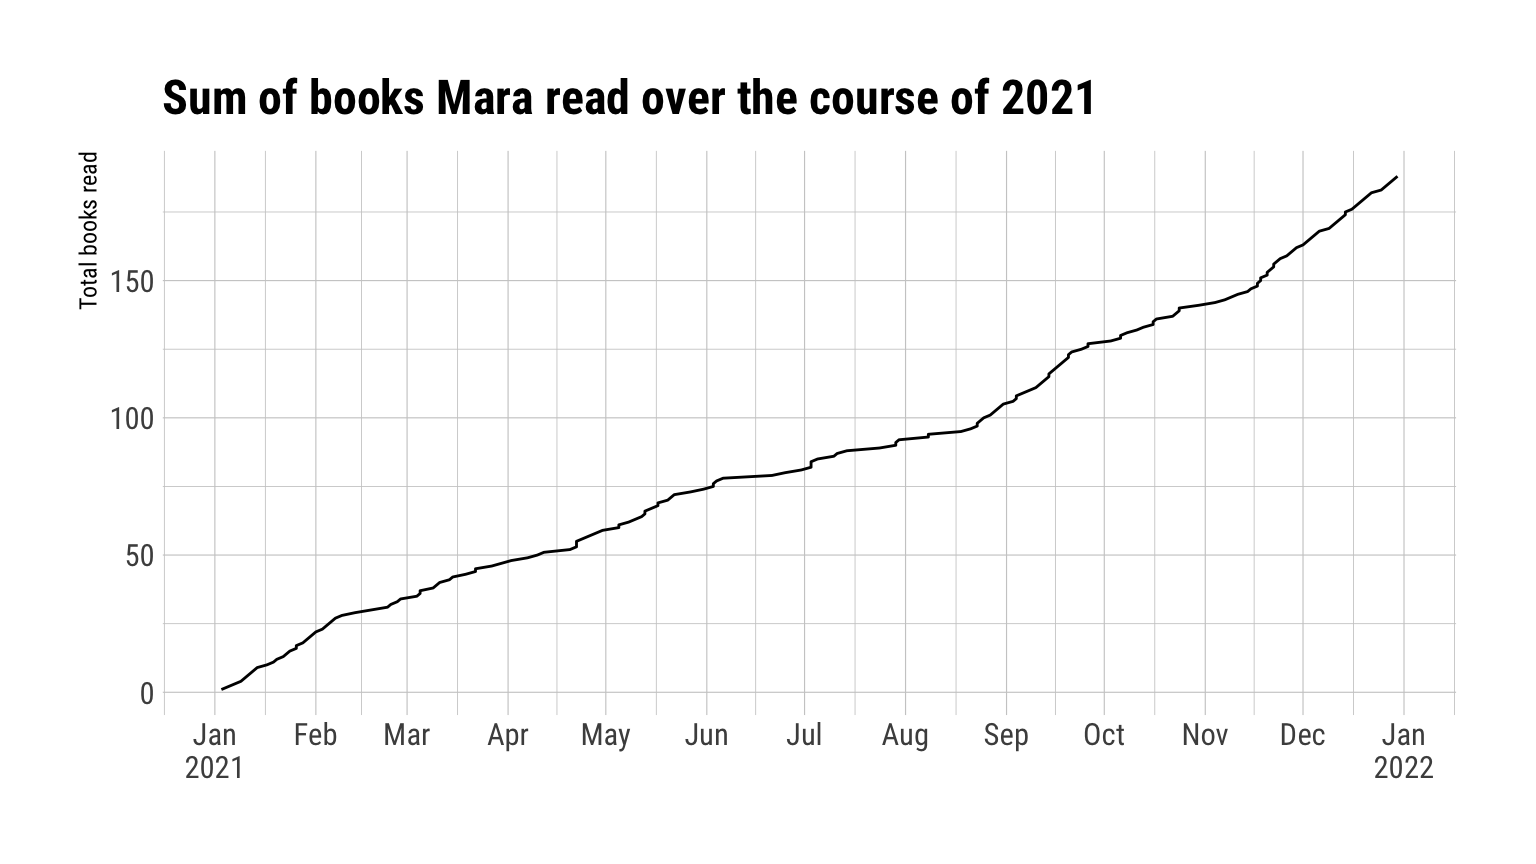 With x-axis range from January 2021 to January 2022, shows relatively steady increase in cumulative sum of books read over time (from zero to ~200, where y-max = 188).